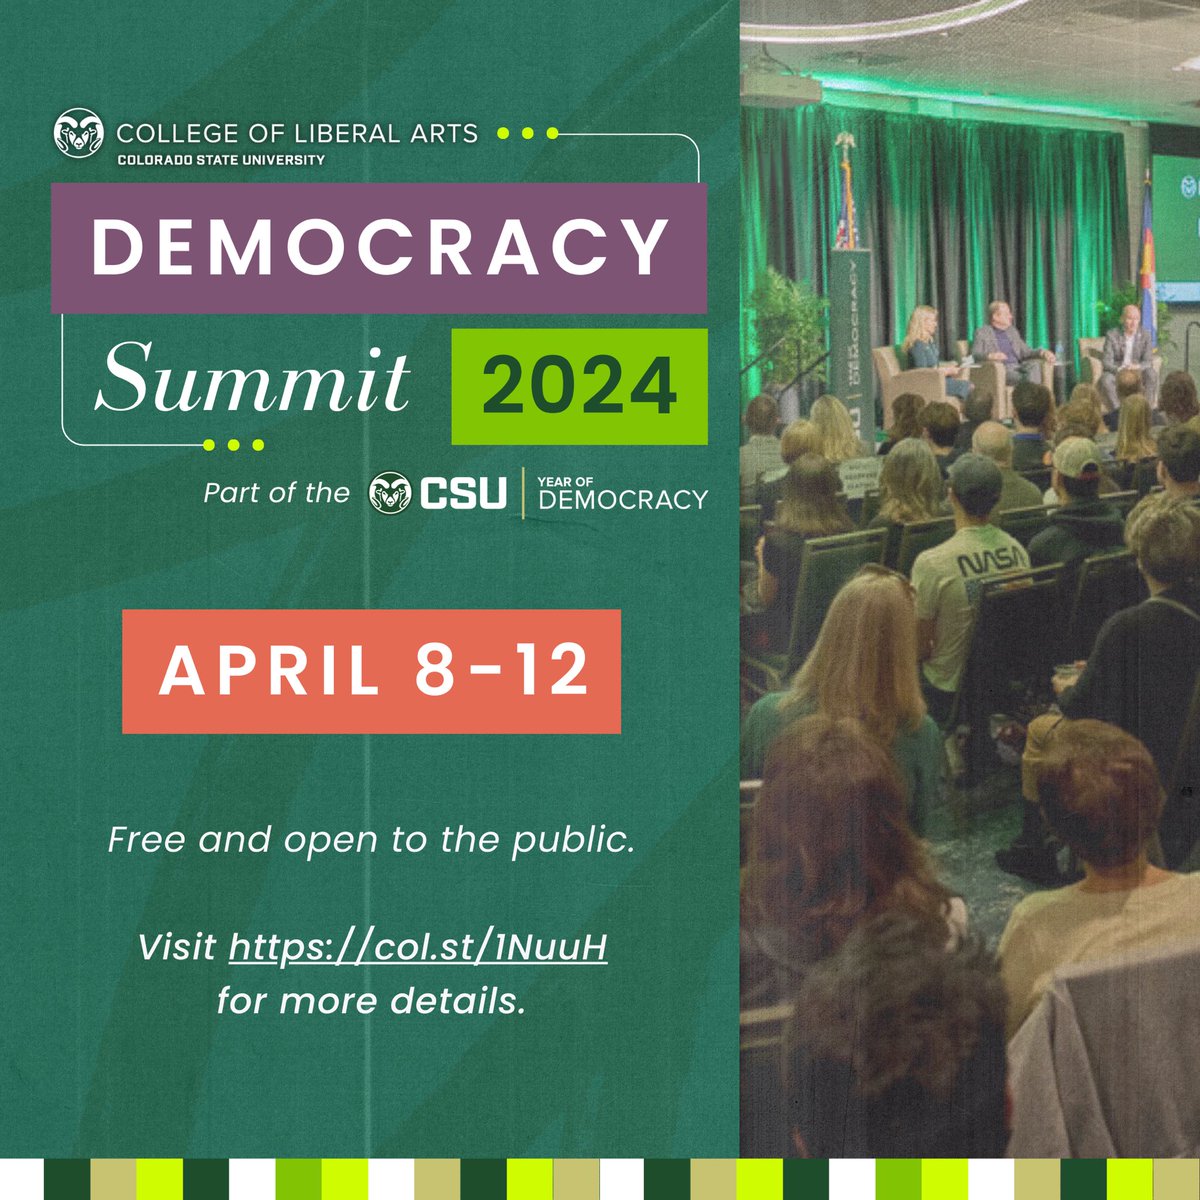 Join us April 8-12, 2024 for the CSU Democracy Summit! This special weeklong event showcasing CSU’s longstanding efforts in democracy and civics spaces will include two prominent speakers: Emmy-winning stand-up comedian and producer W. Kamau Bell and Dr. Robert D. Putnam!